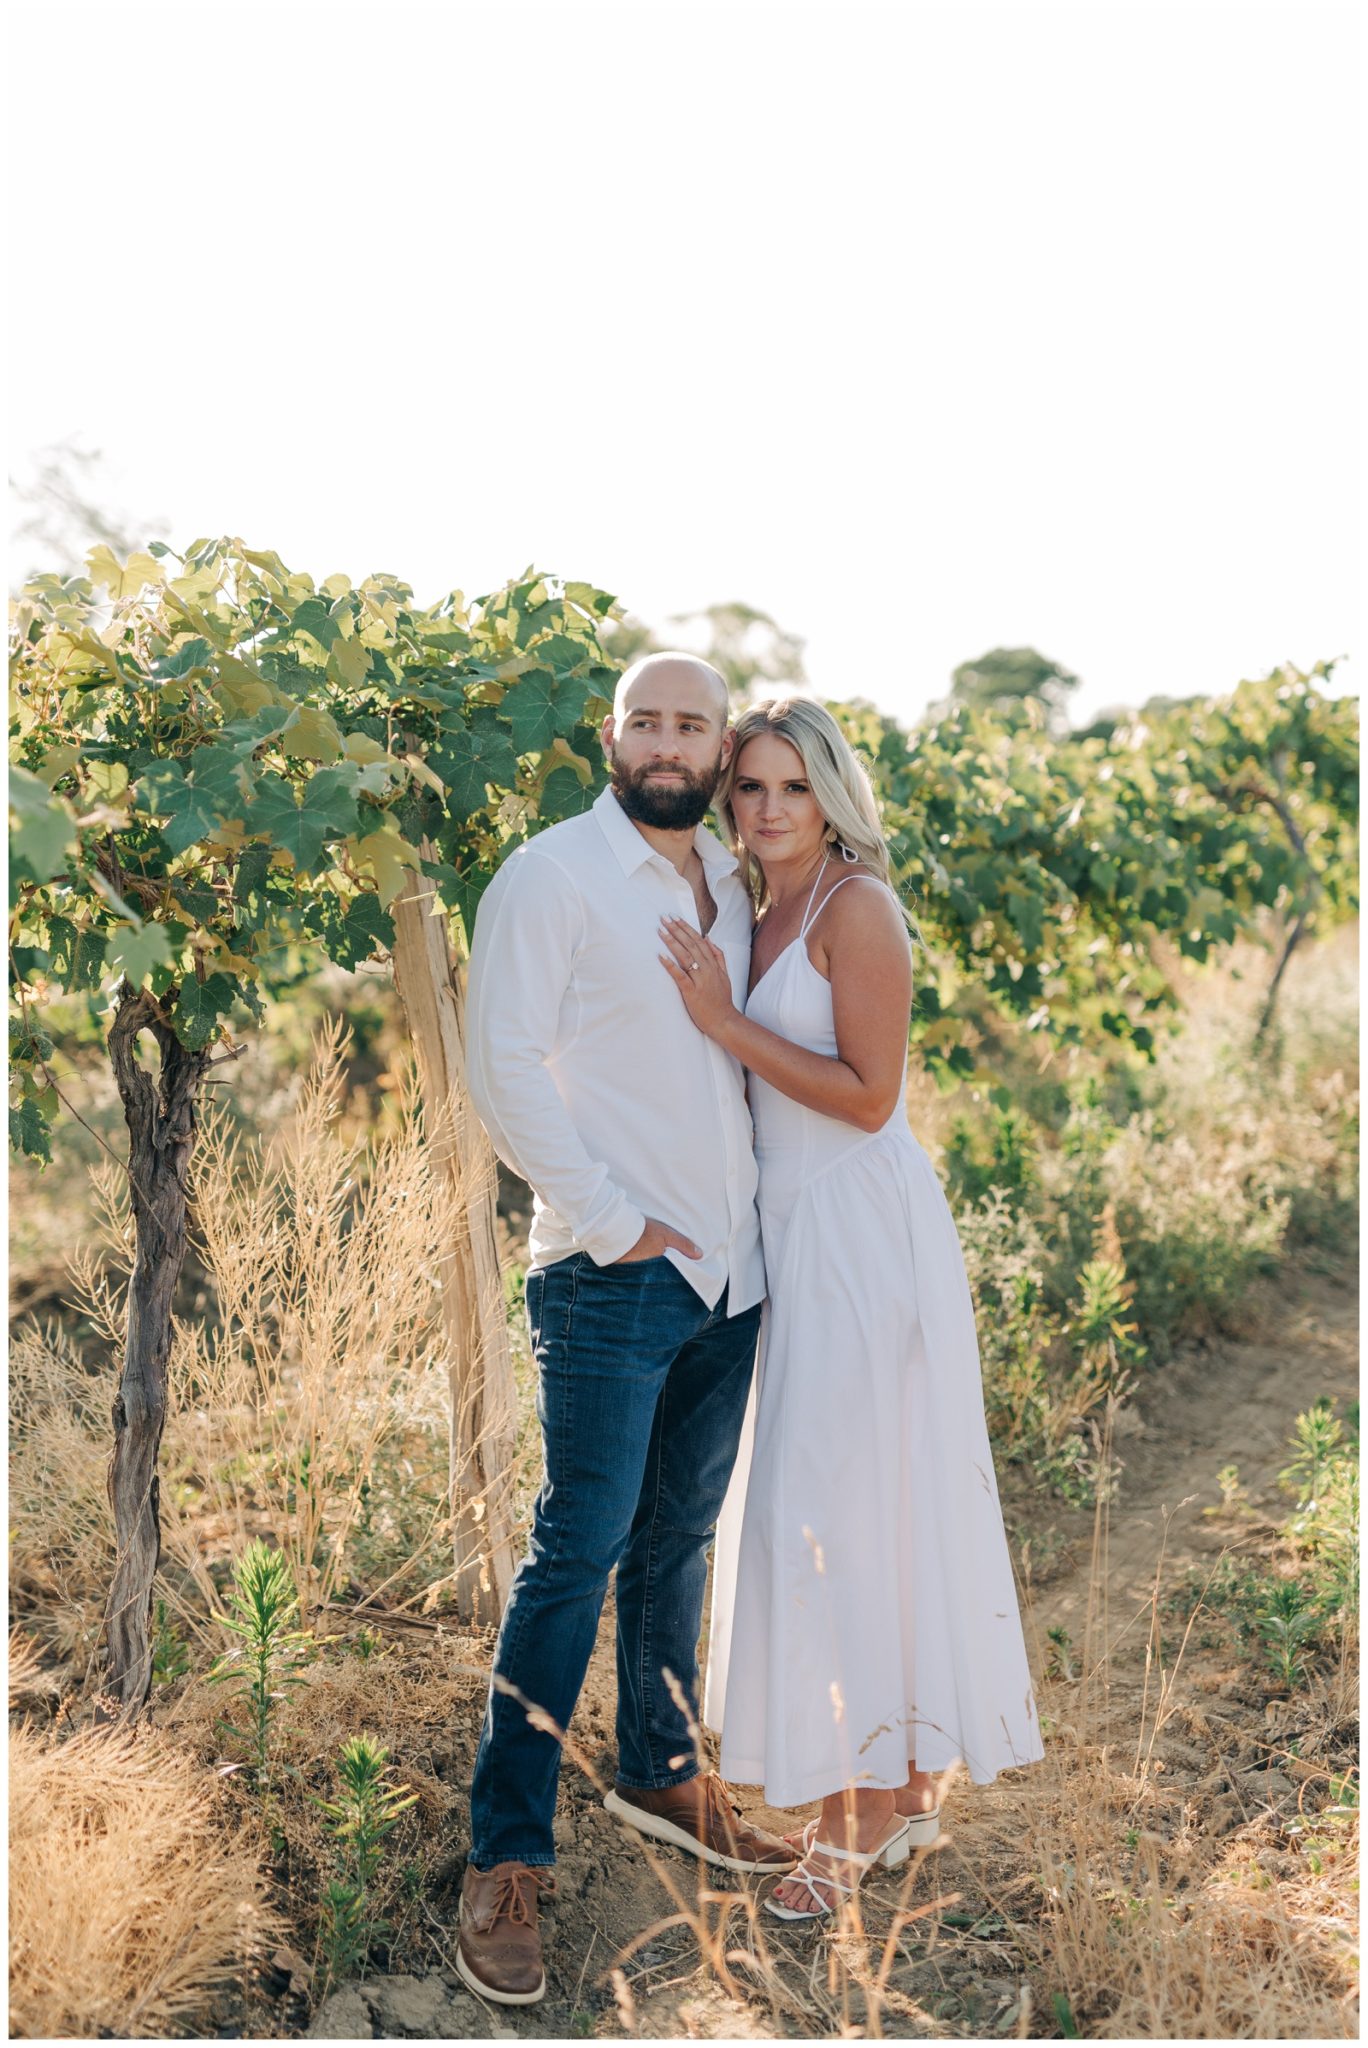 Quincy Cellars Vineyard Engagement Session